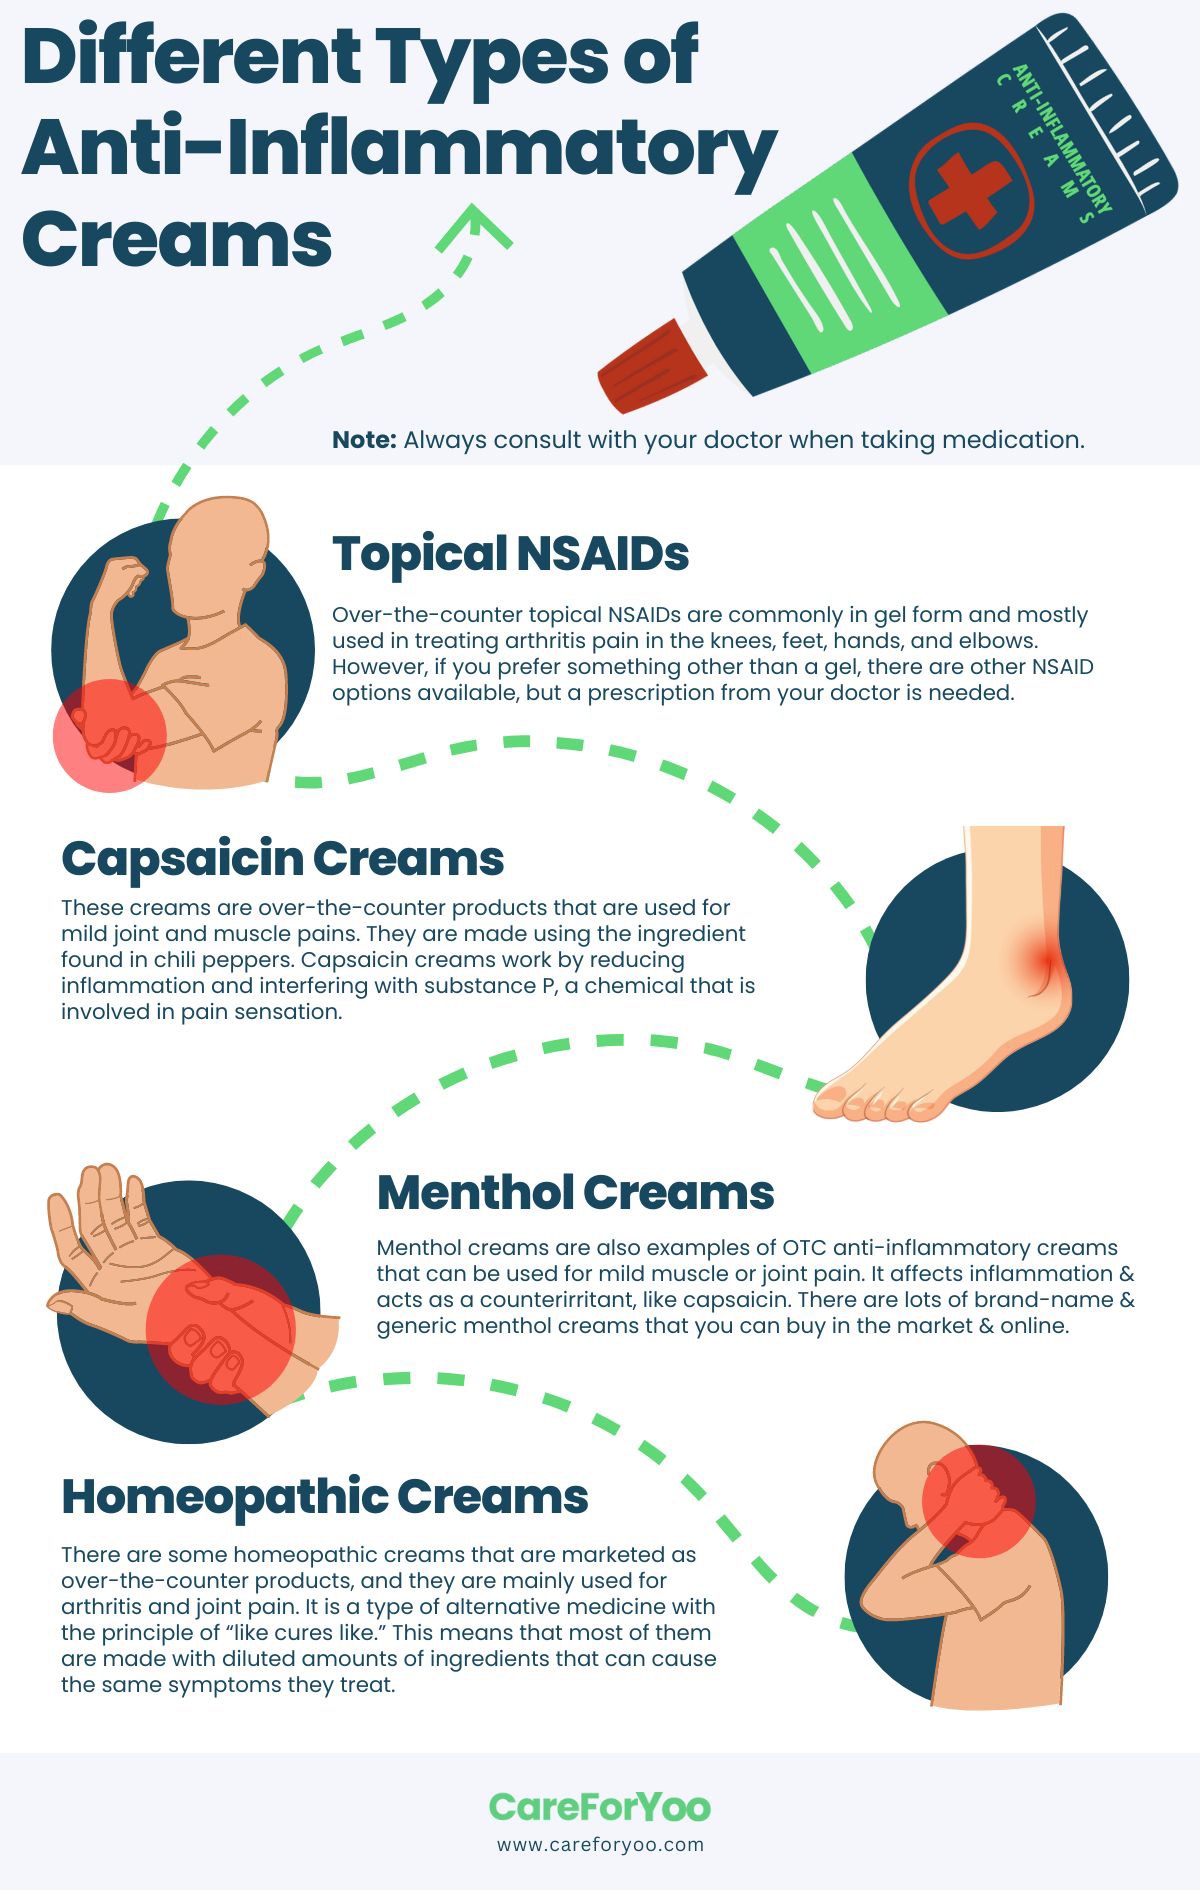 Different Types of Anti-Inflammatory Creams